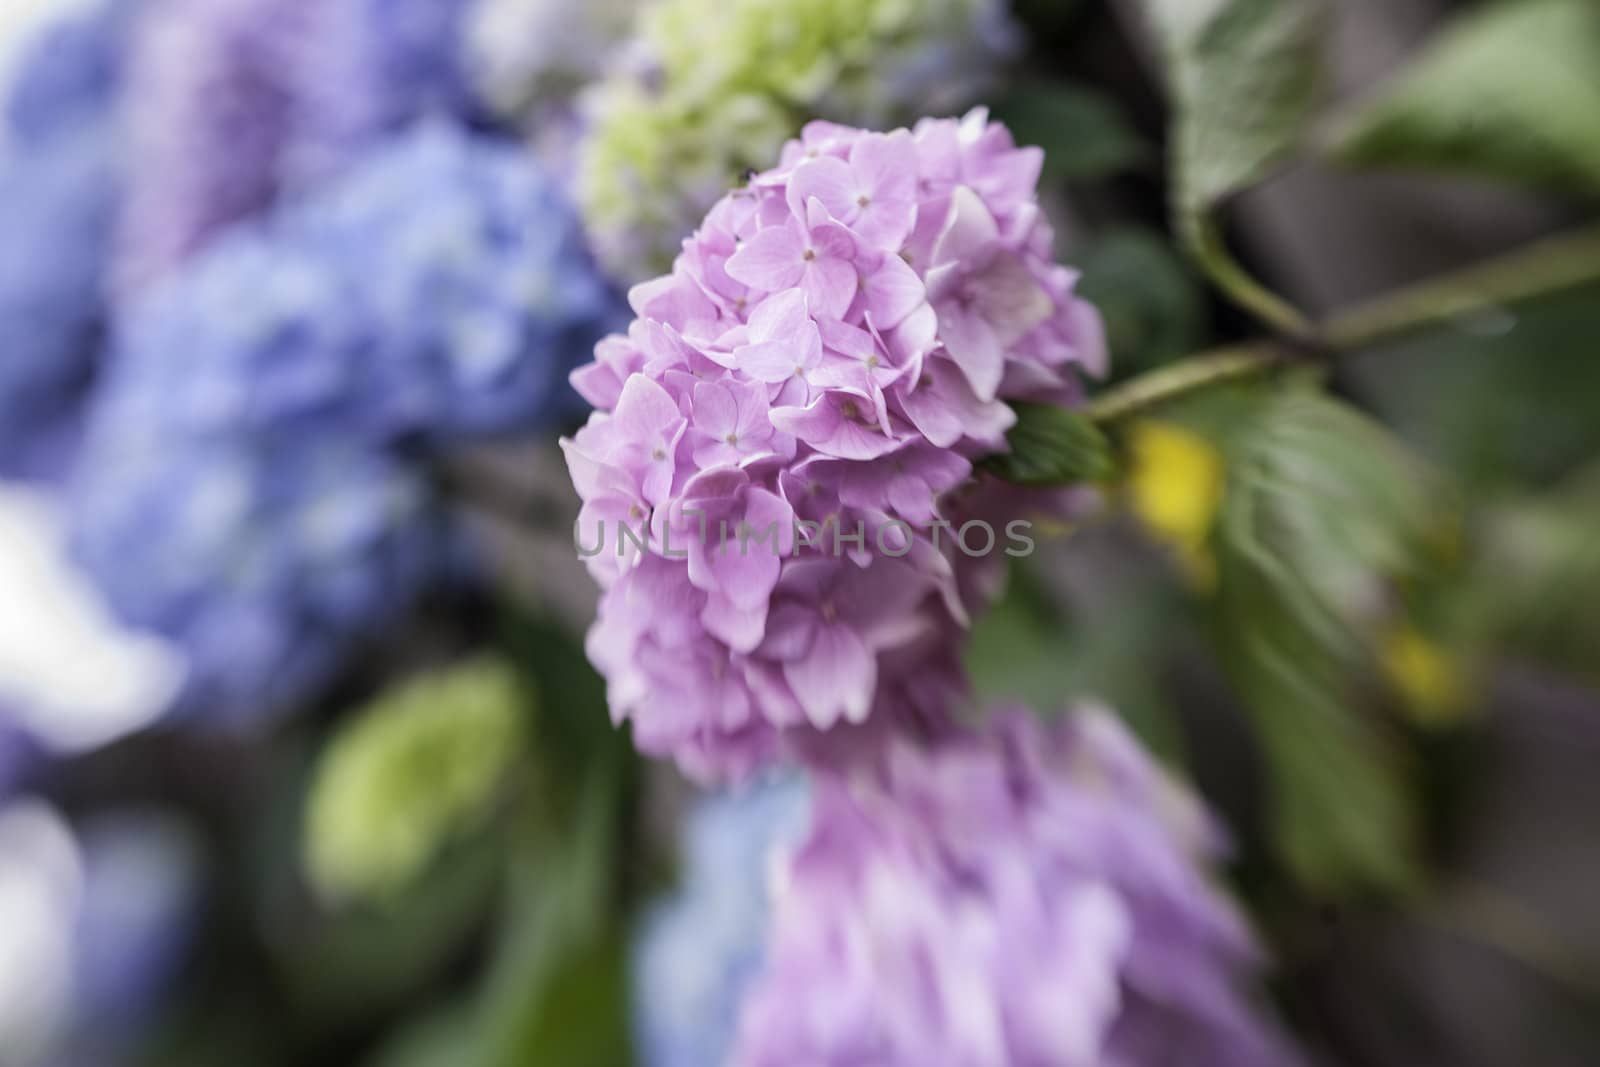 Abstract background of a blue hydrangea flower head showing the clusters of small pale blue flowers with shallow dof taken with a lensbaby